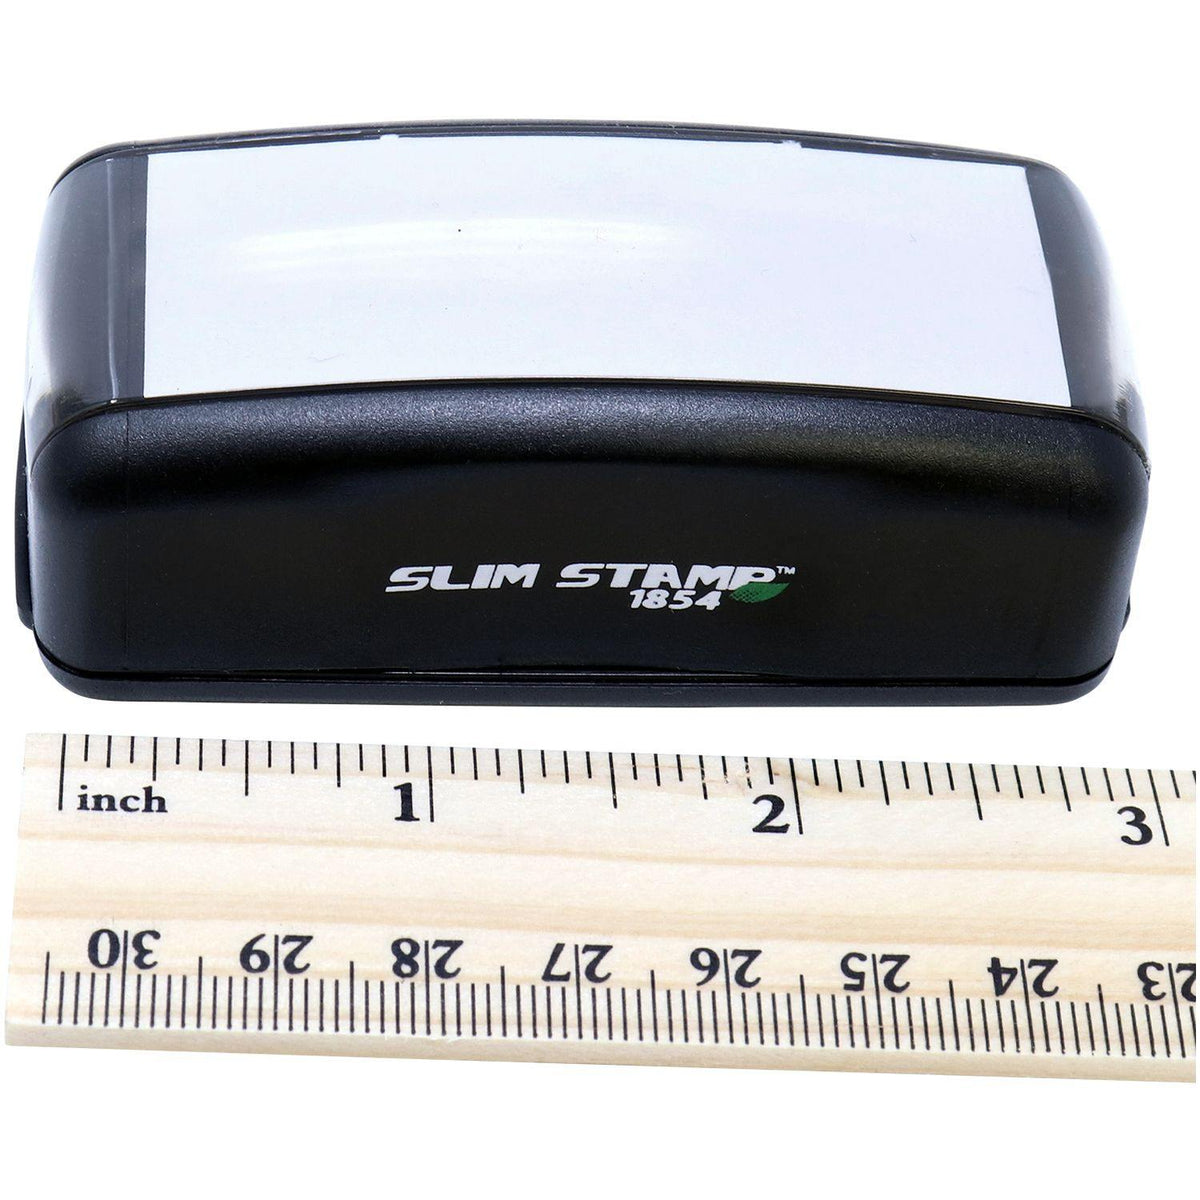 Measurement Large Pre Inked Mortgages Stamp with Ruler